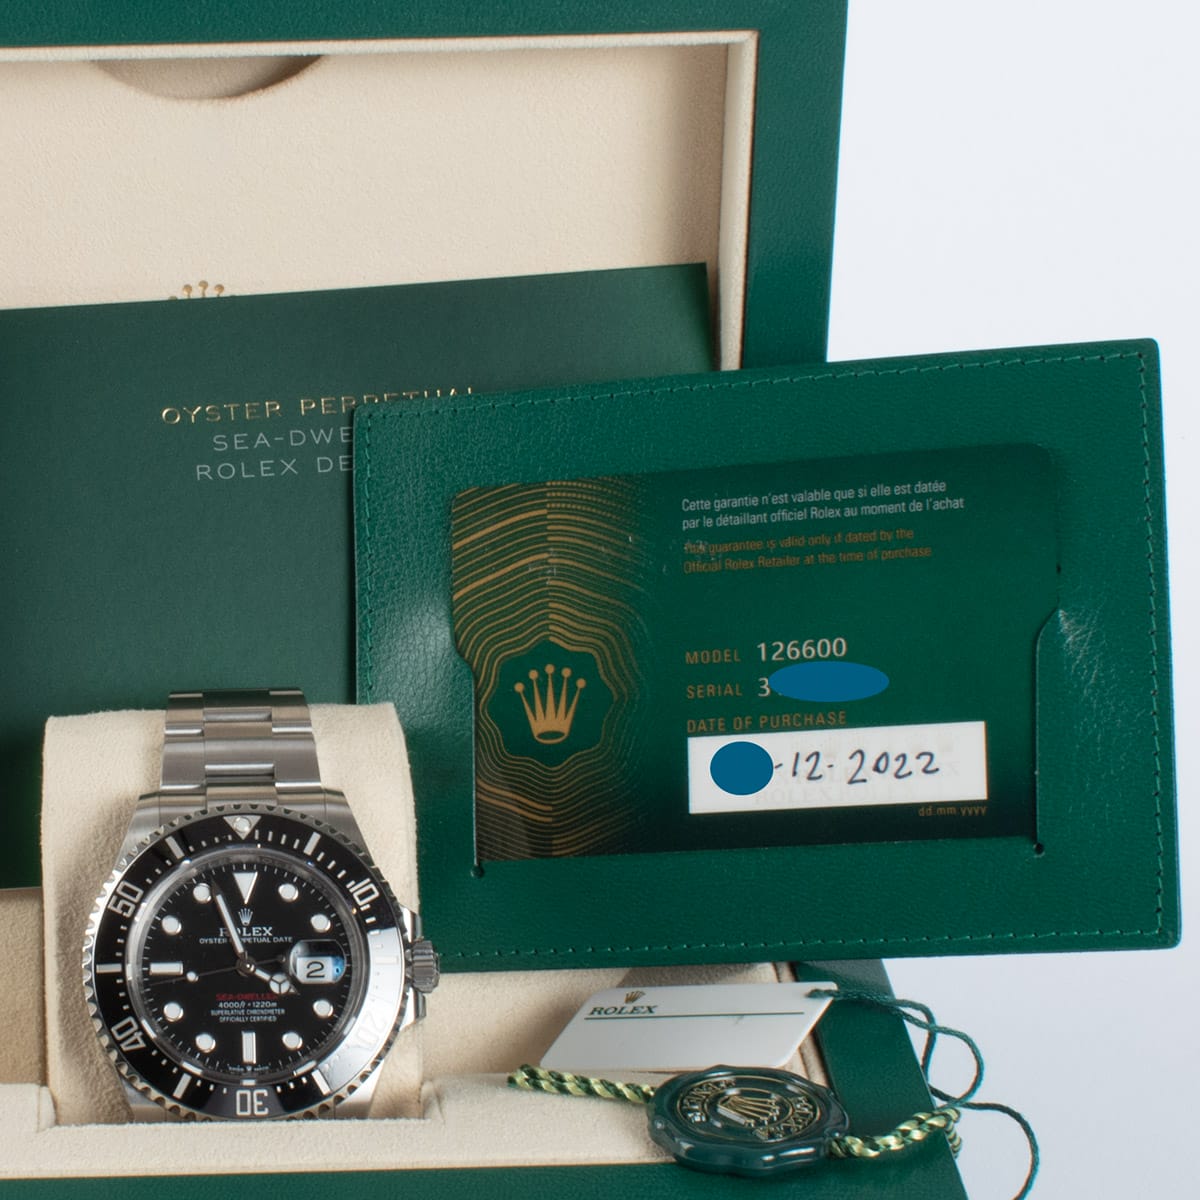 View in Box of Sea-Dweller 43mm